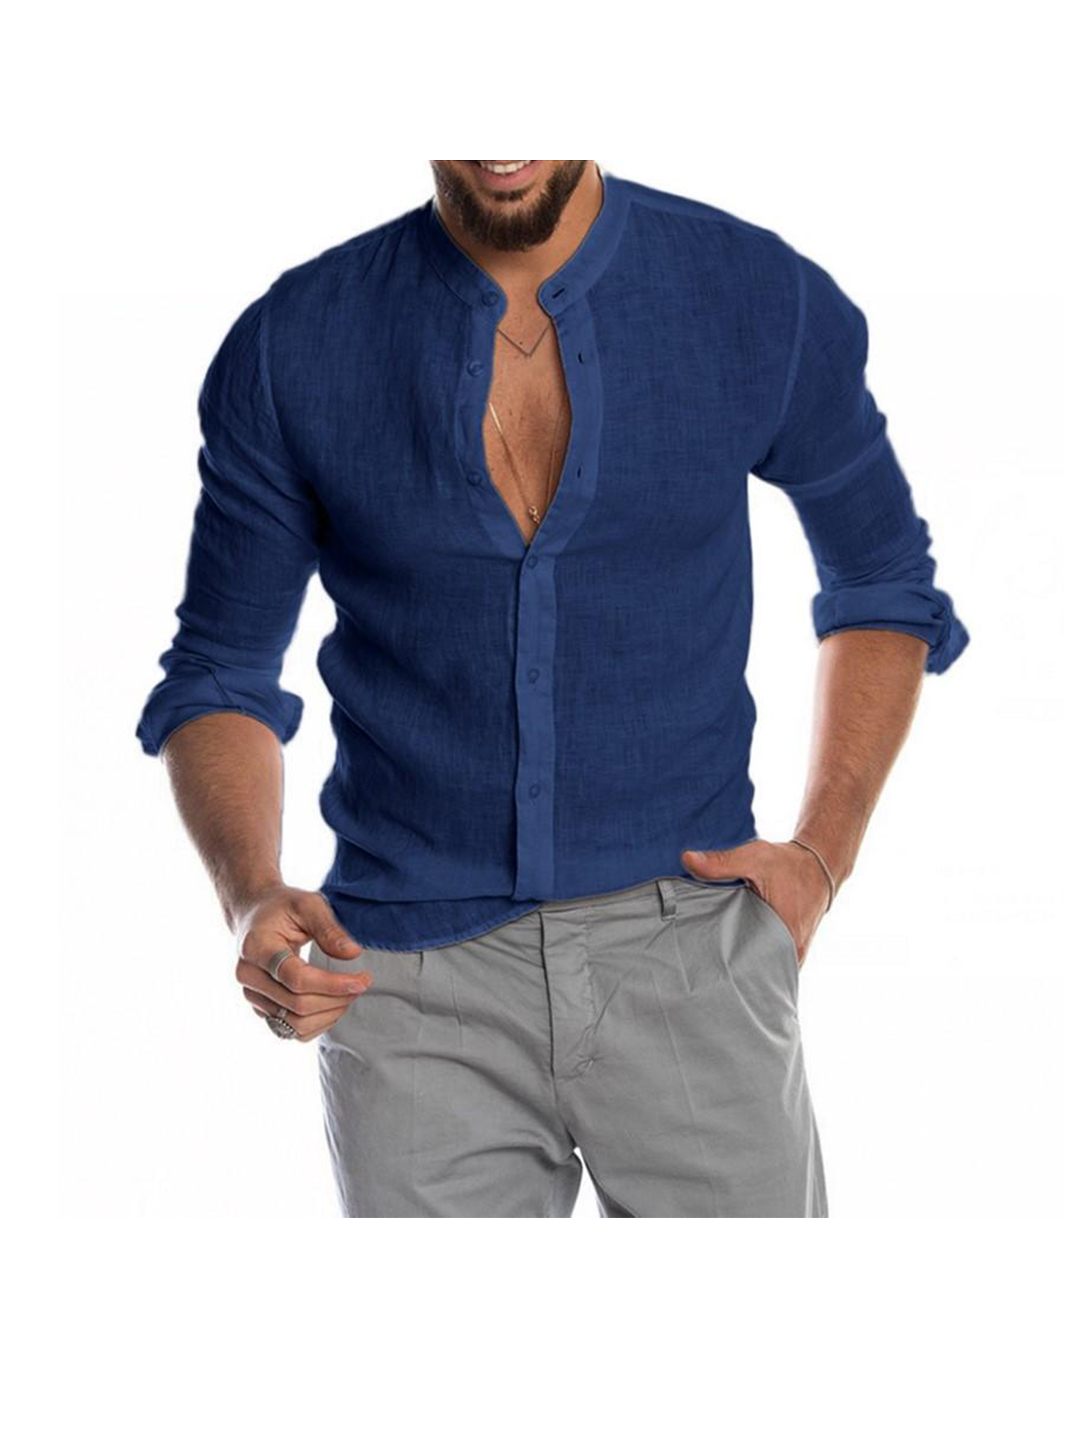 Charles Faxu Linen And Cotton Stand Collar Casual Shirt